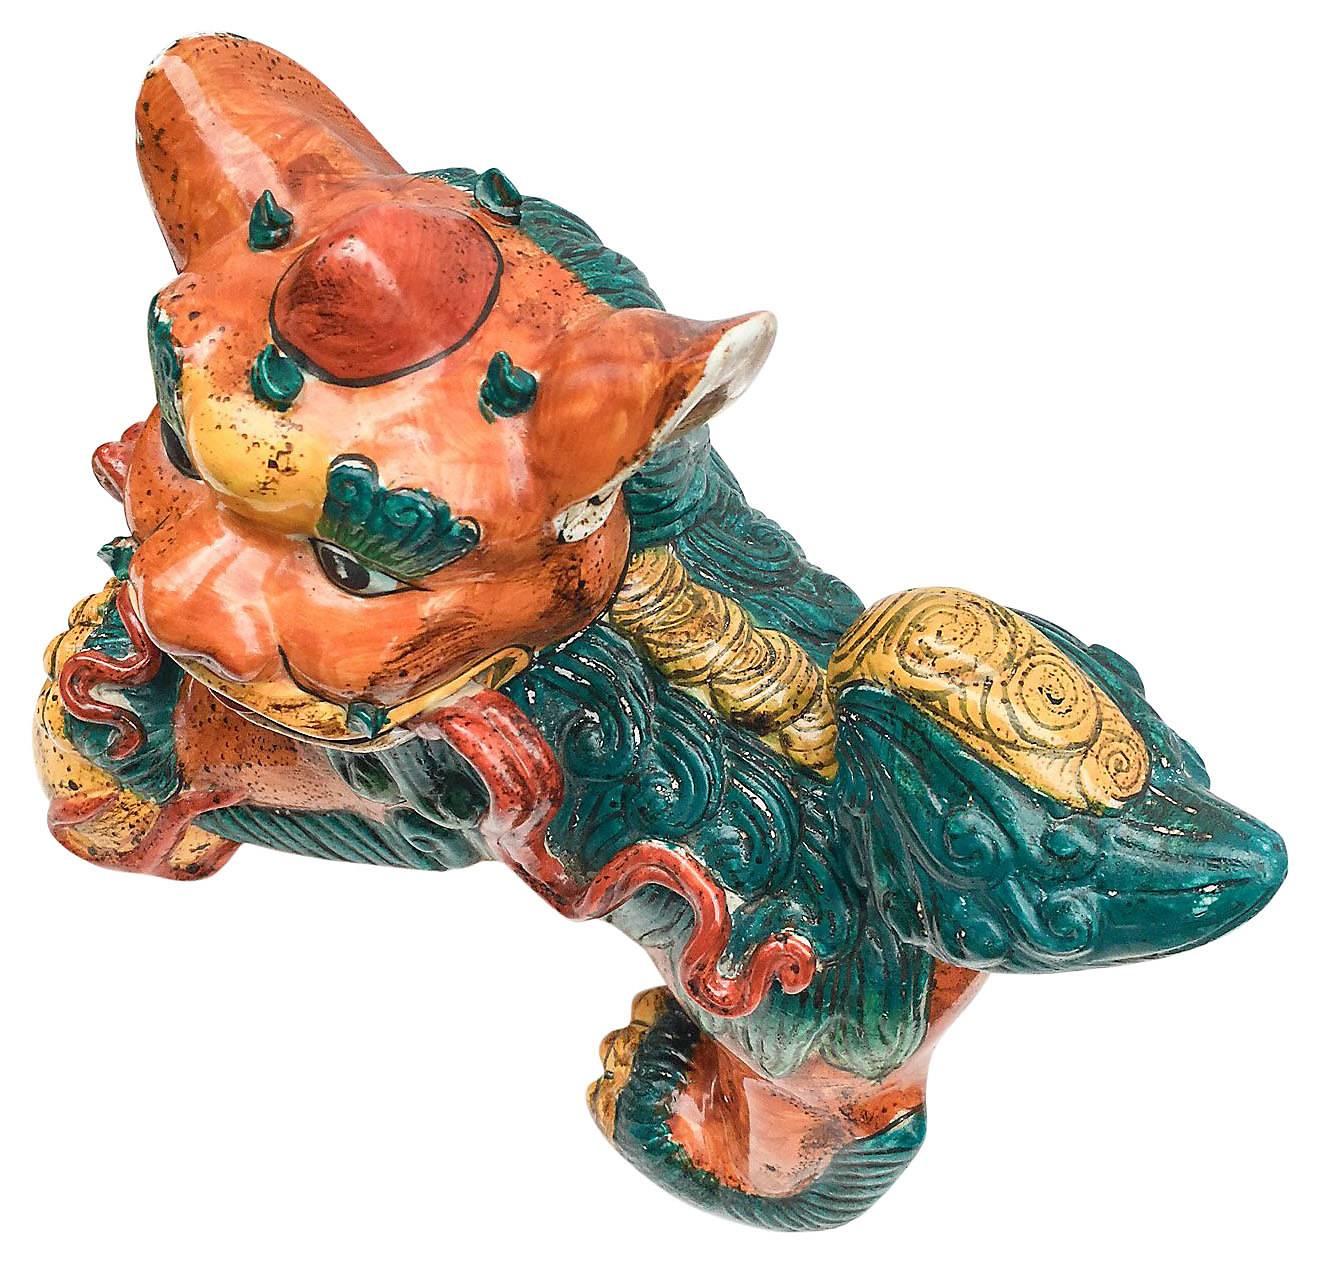 Polychromed 19th Century Large Polychrome Chinese Foo Dog Statues, Pair